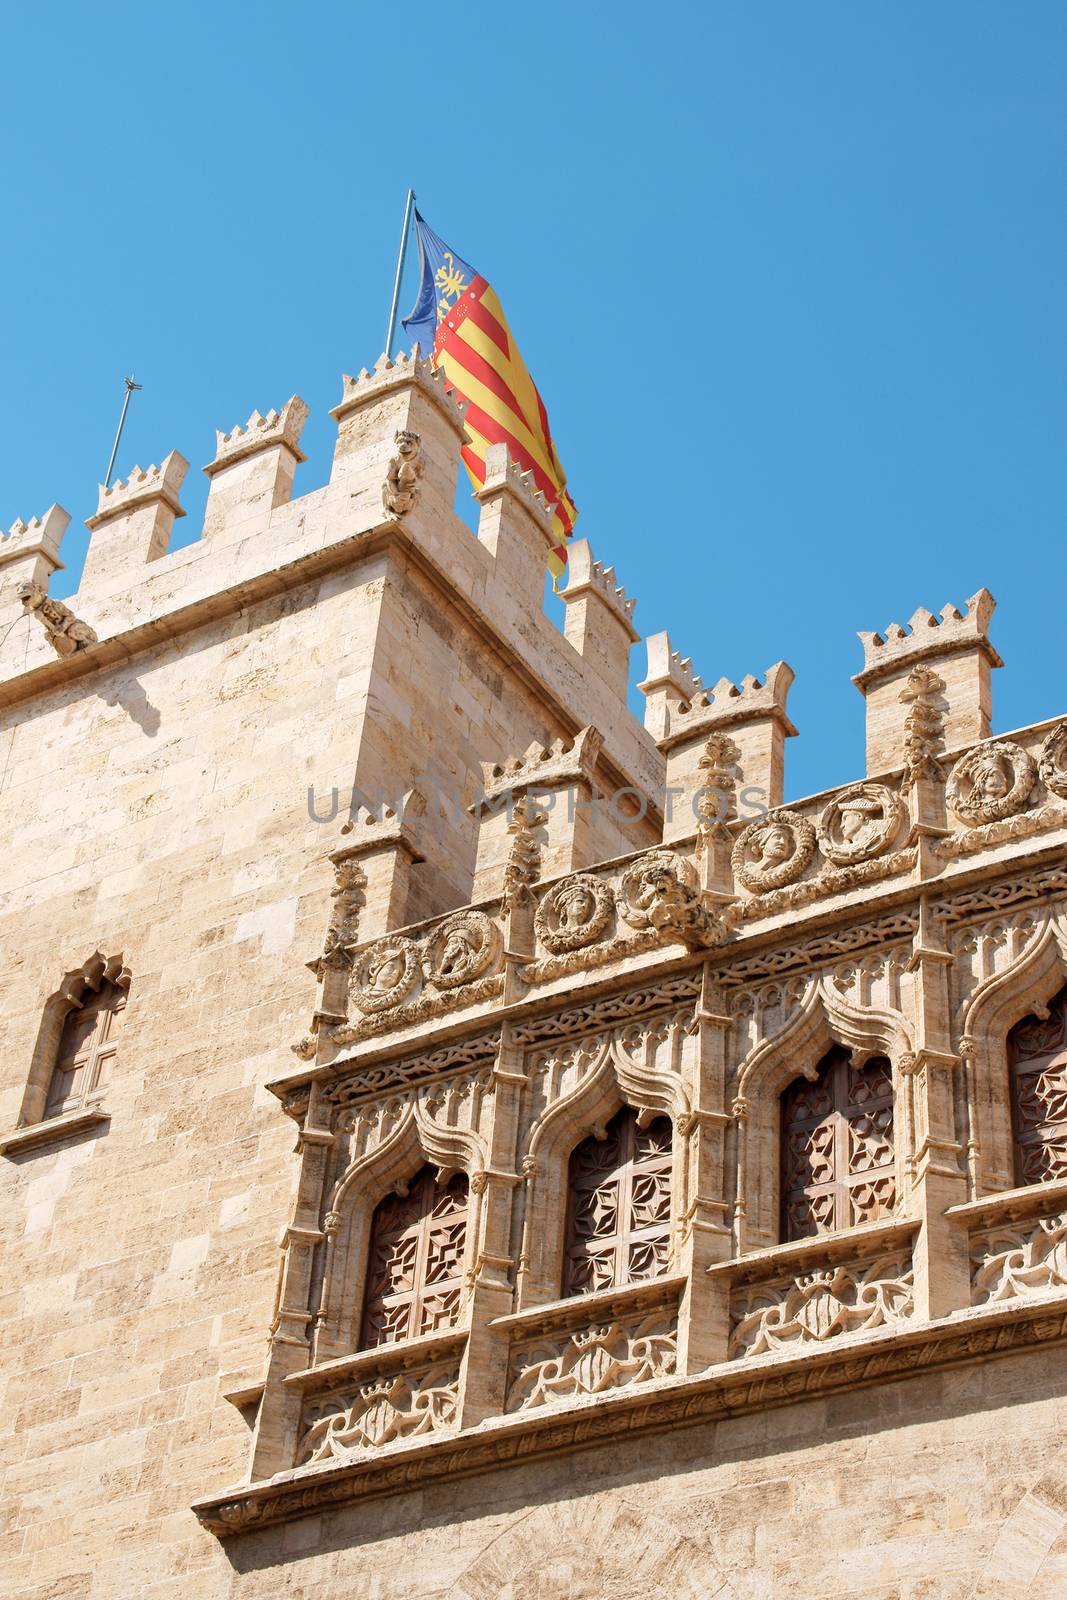 Detail of the Lonja de la Seda of Valencia in Spain and the valencian flag. This small complex of late gothic buildings, originally was used to trade silk. From 1996 it's part of UNESCO World Heritage Sites.